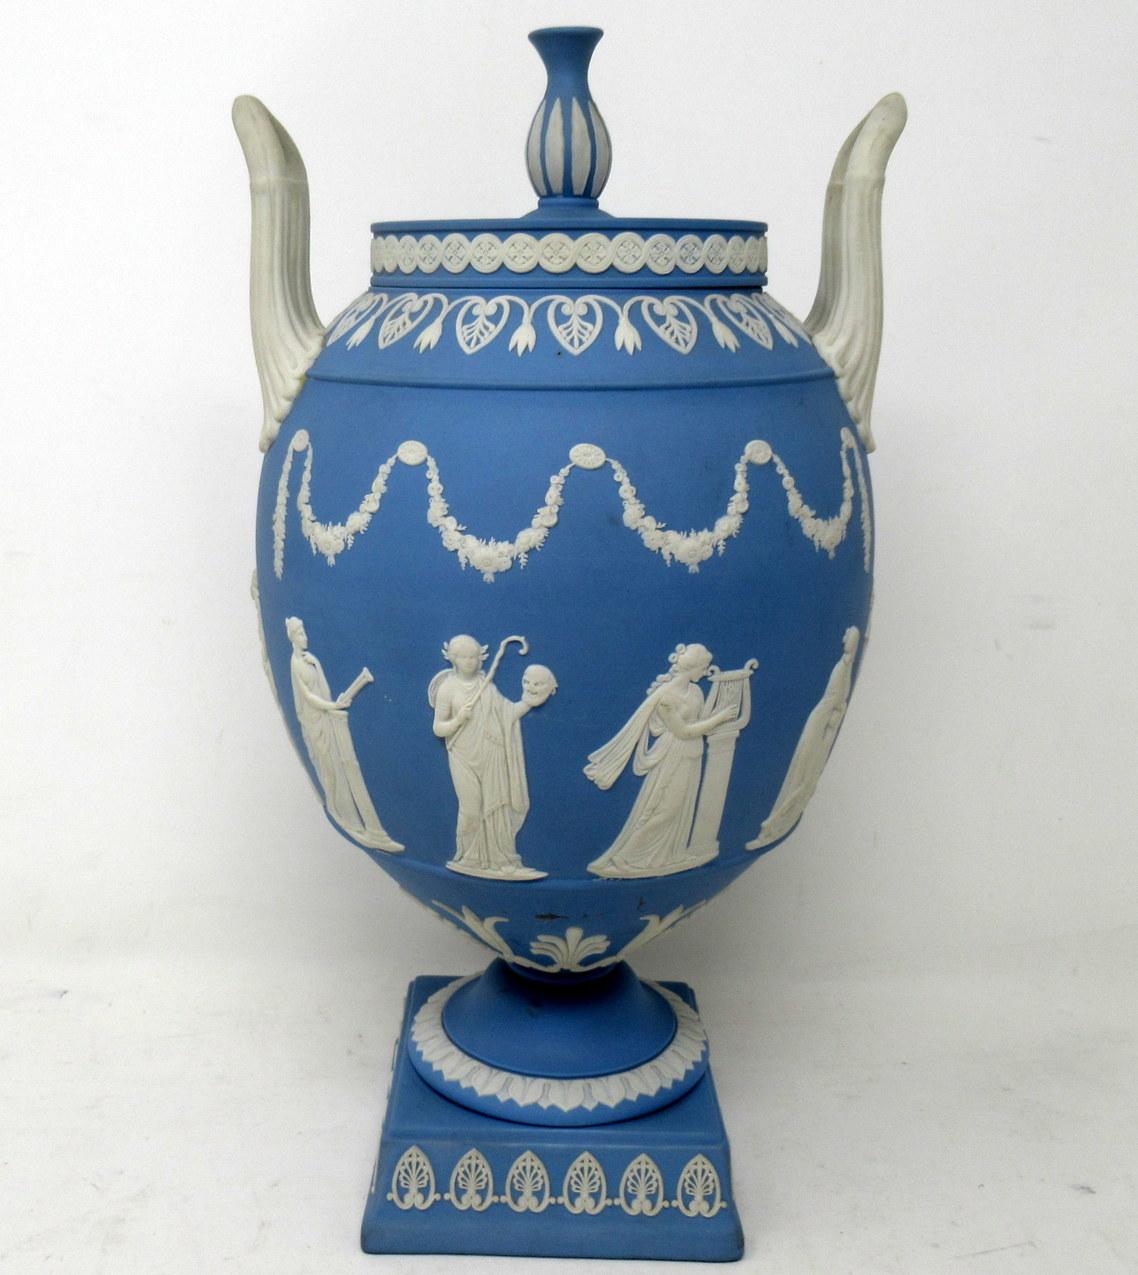 An Exquisite and quite rare English Staffordshire Wedgwood Jasperware blue ground Vase of Amphora outline and generous proportions, after an earlier model by John Flaxman Junior. Circa mid Twentieth Century. 

The arch ovoid body sprigged in white